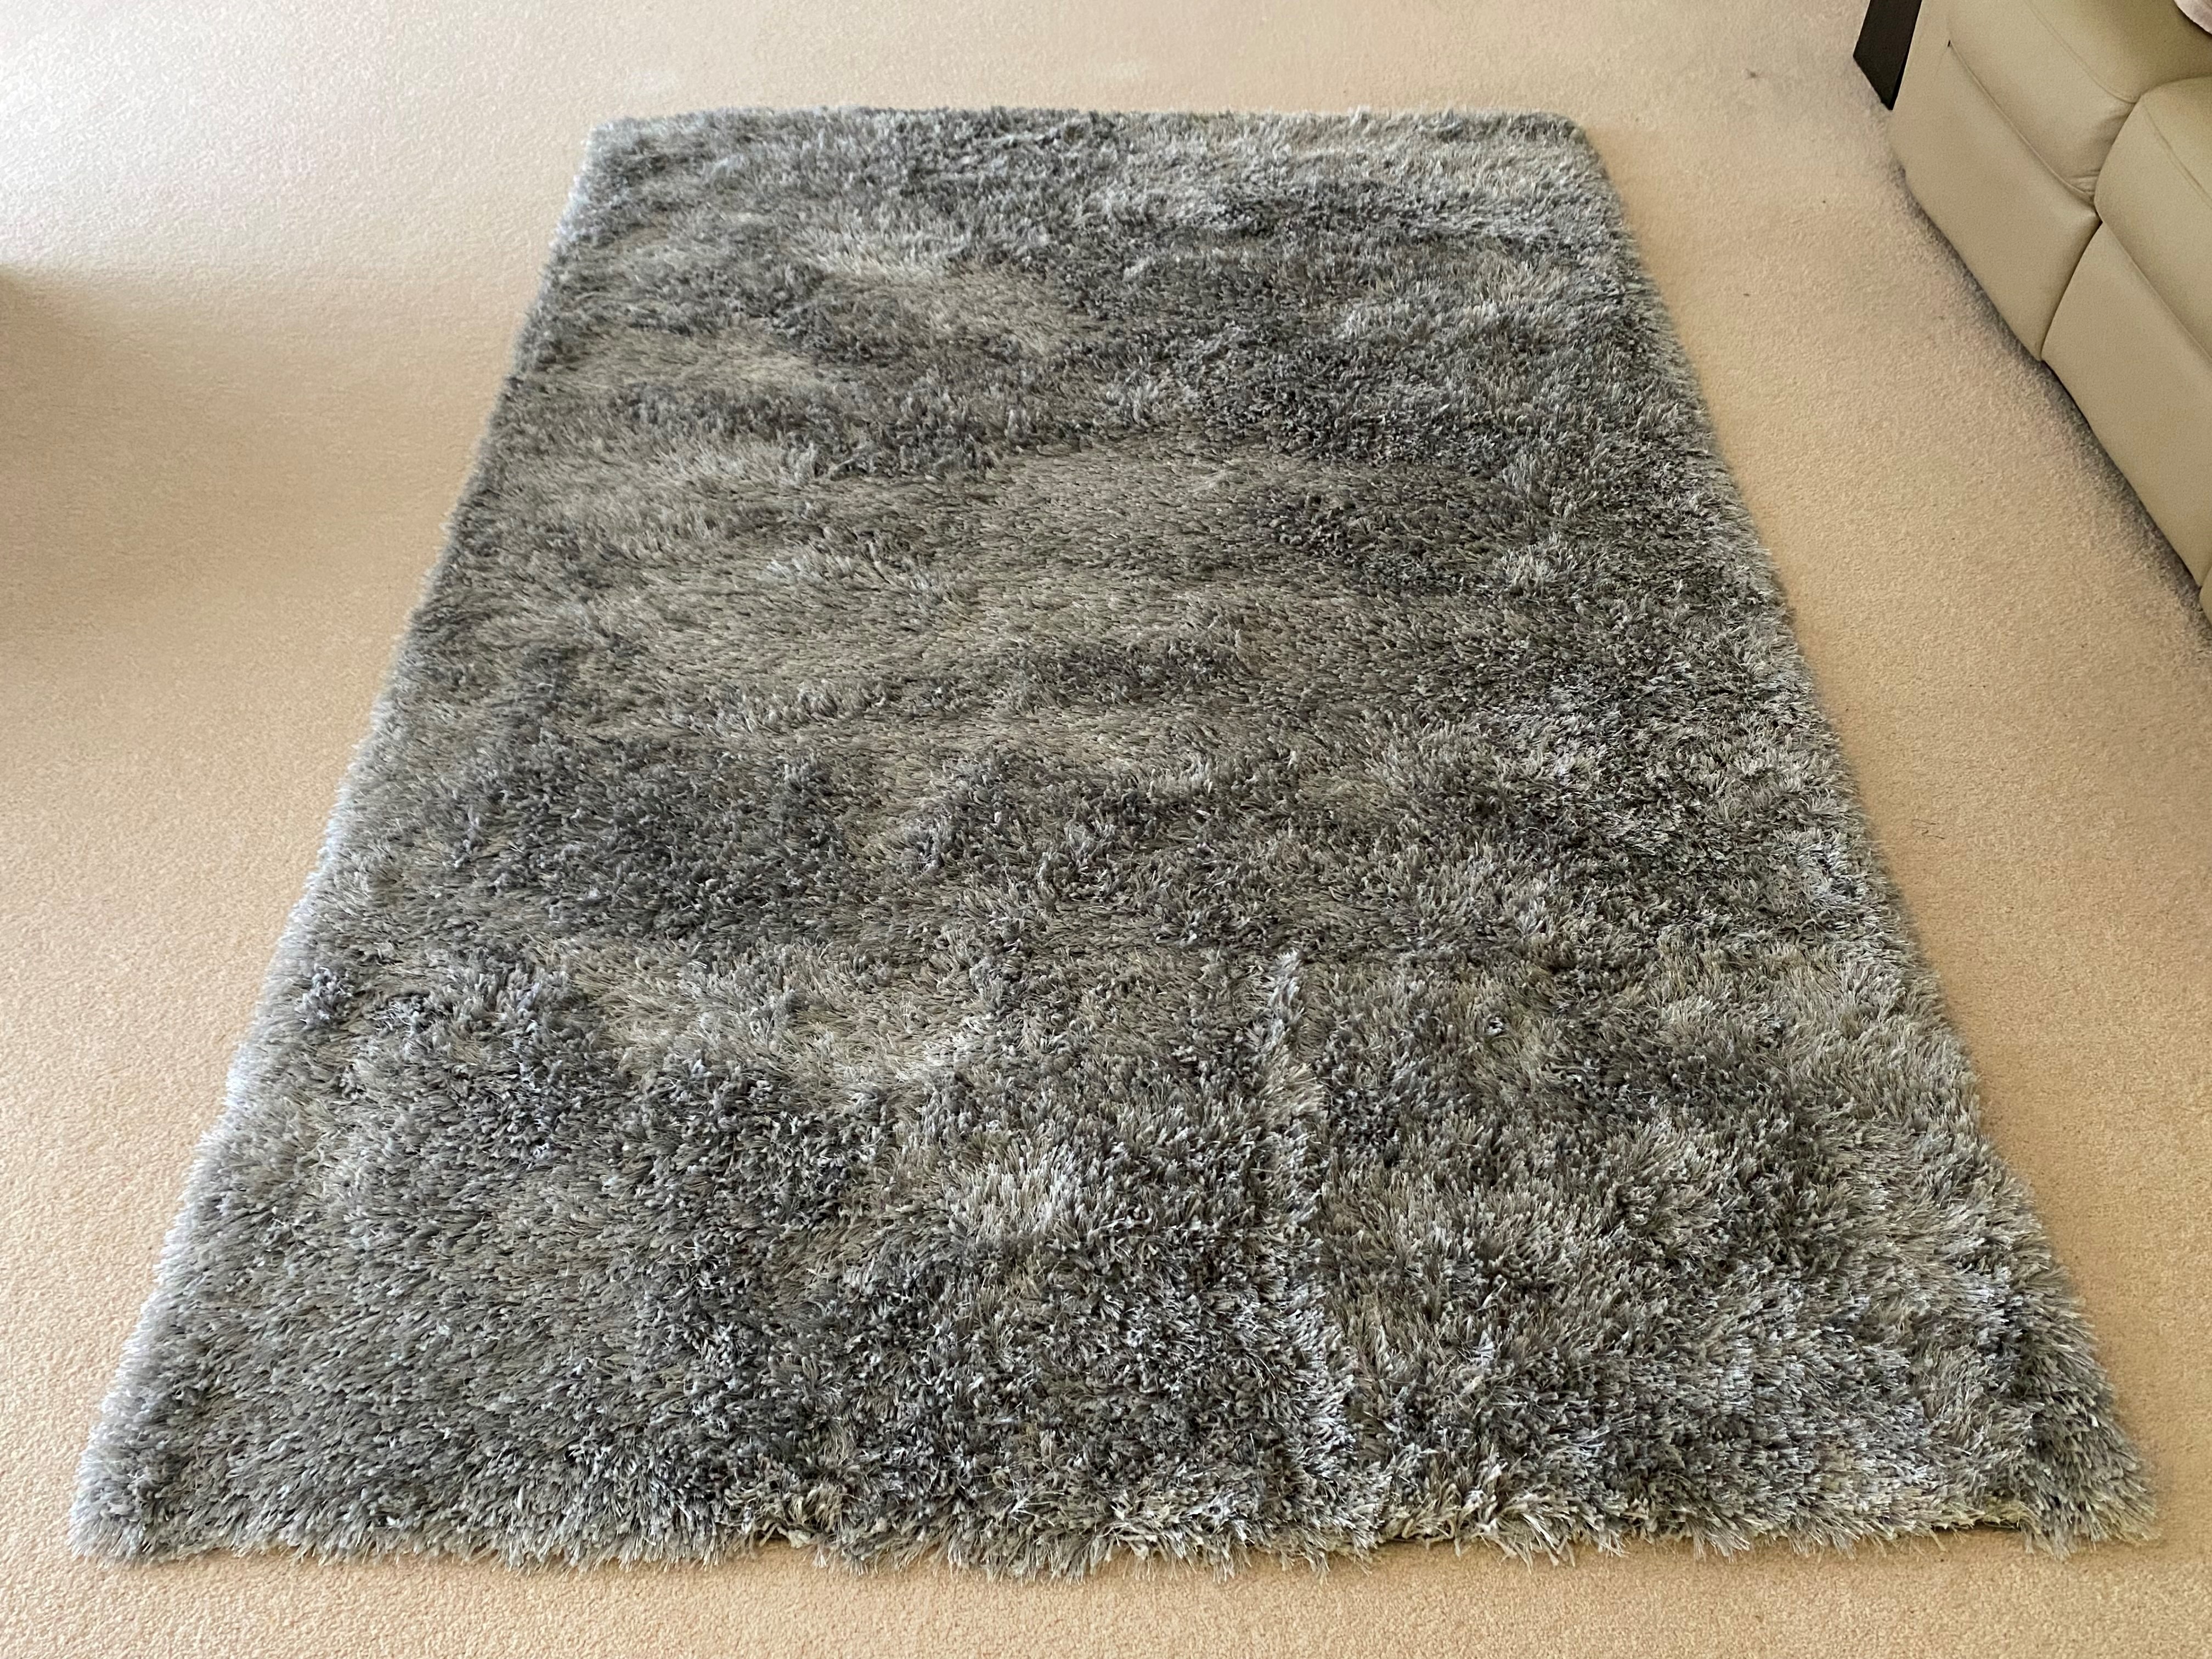 Second-hand Rug - Photo 1)